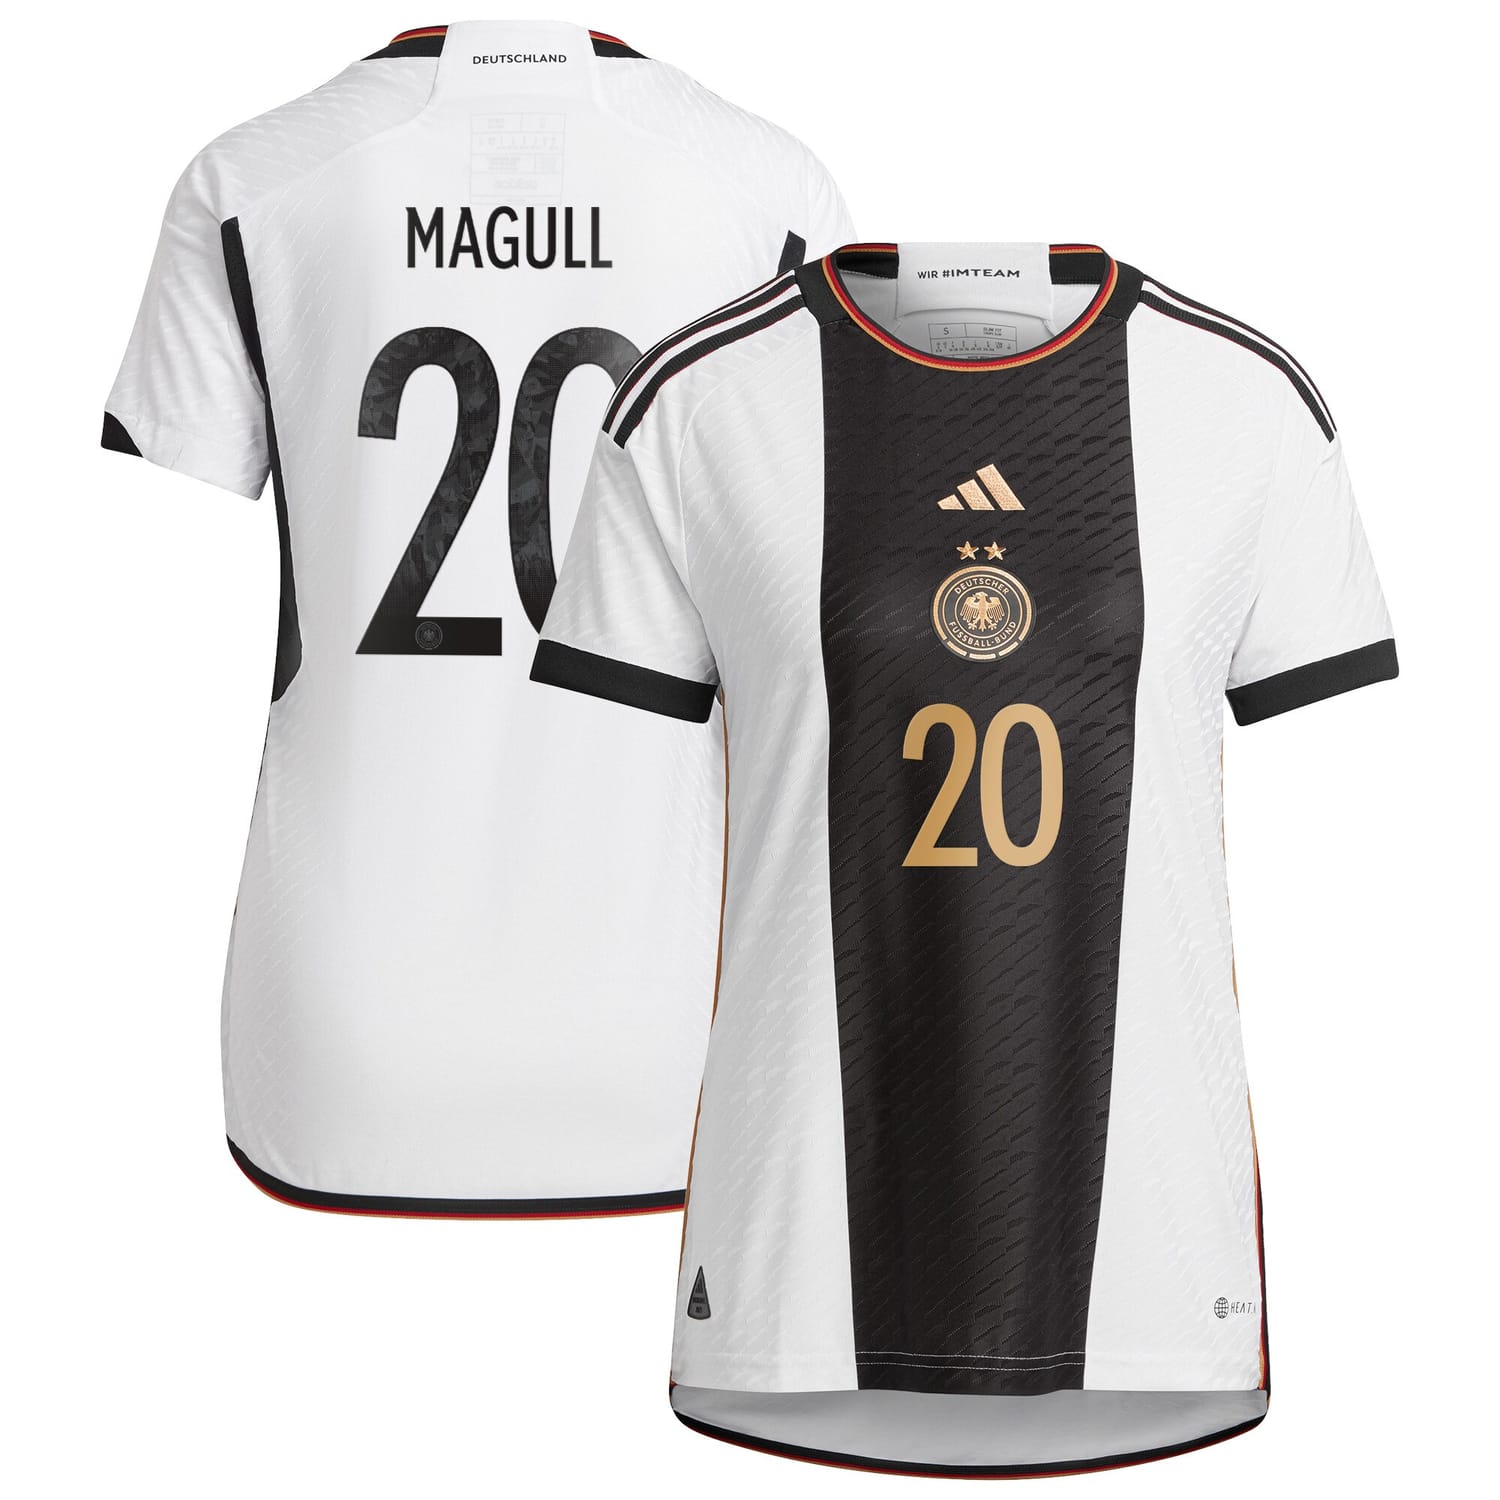 Germany National Team Home Authentic Jersey Shirt player Lina Magull 20 printing for Women